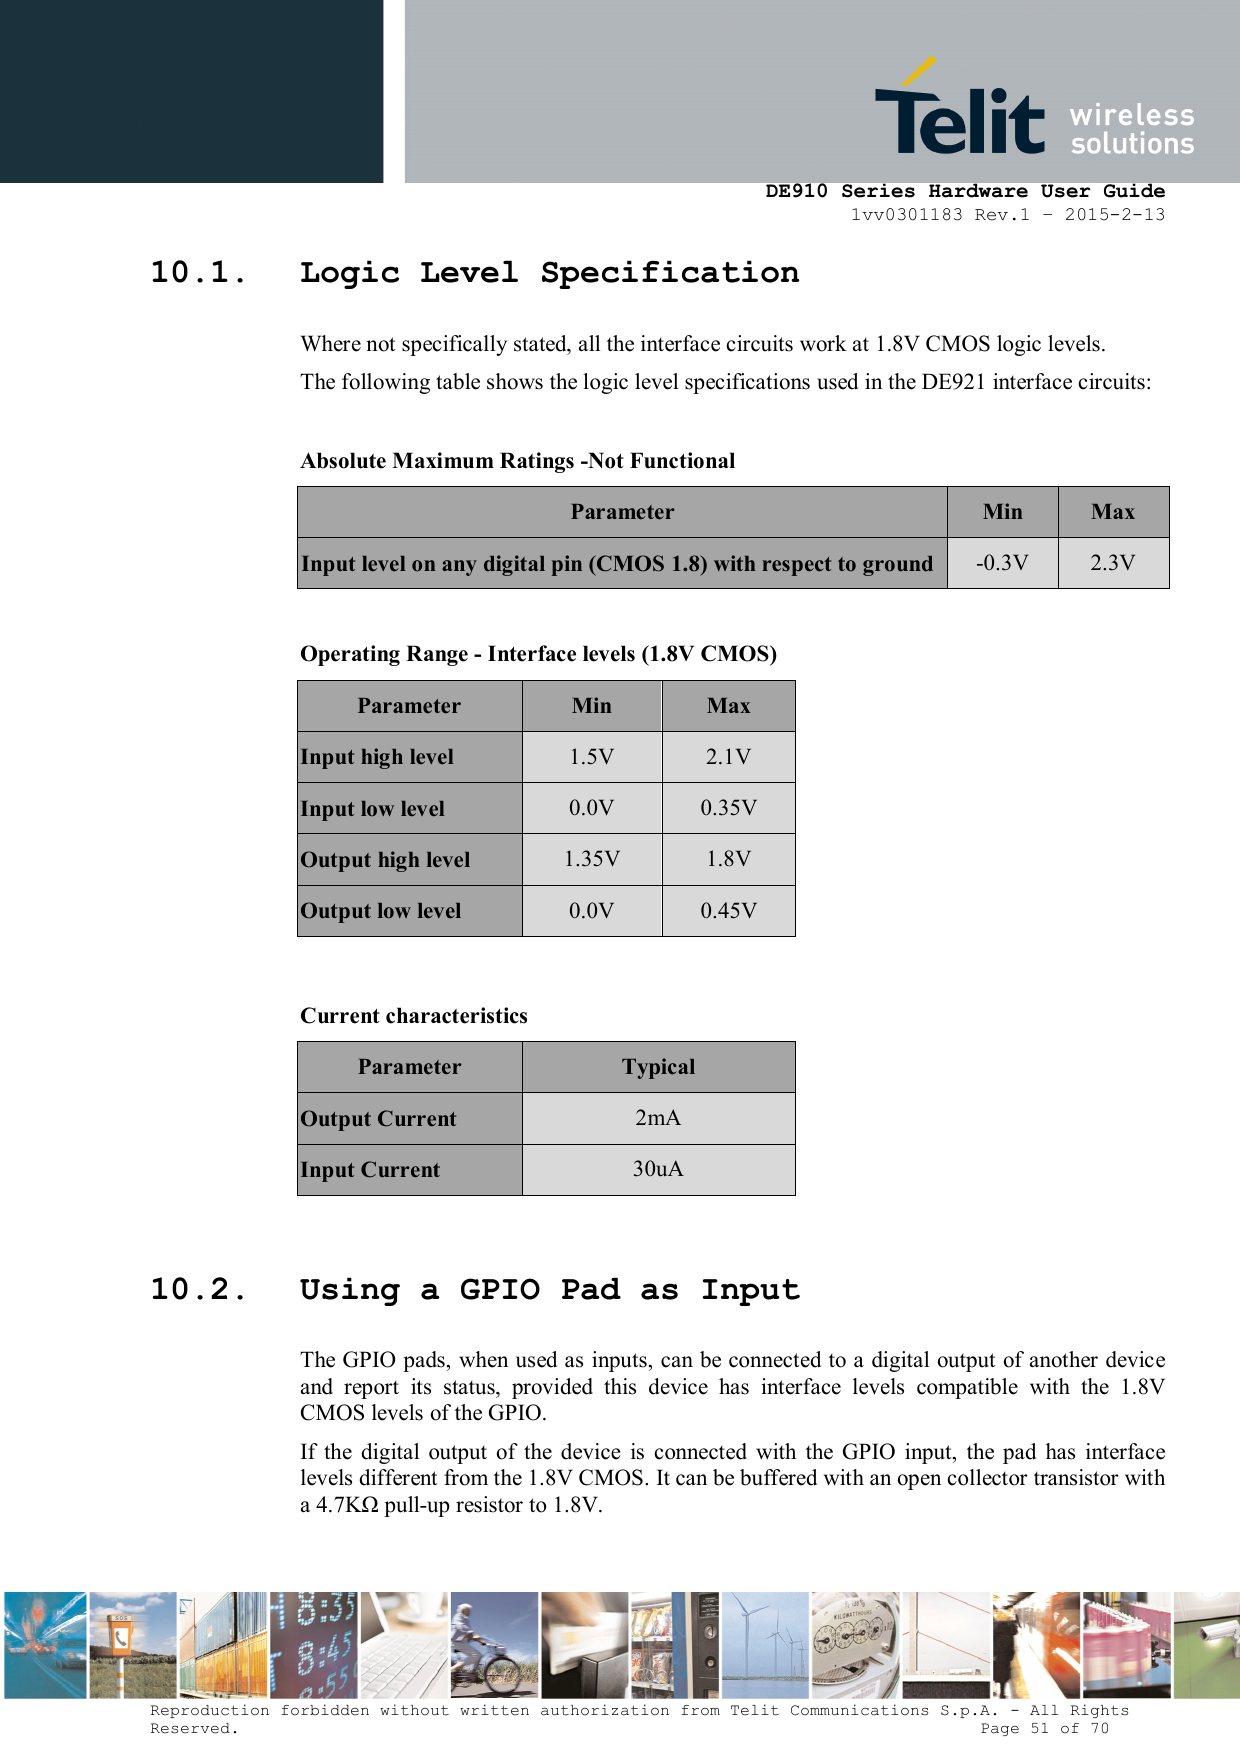      DE910 Series Hardware User Guide 1vv0301183 Rev.1 – 2015-2-13 Reproduction forbidden without written authorization from Telit Communications S.p.A. - All Rights Reserved.                                                                          Page 51 of 70 10.1. Logic Level Specification Where not specifically stated, all the interface circuits work at 1.8V CMOS logic levels. The following table shows the logic level specifications used in the DE921 interface circuits:  Absolute Maximum Ratings -Not Functional Parameter  Min  Max Input level on any digital pin (CMOS 1.8) with respect to ground -0.3V  2.3V  Operating Range - Interface levels (1.8V CMOS) Parameter  Min  Max Input high level  1.5V  2.1V Input low level  0.0V  0.35V Output high level  1.35V  1.8V Output low level  0.0V  0.45V   Current characteristics  Parameter   Typical Output Current  2mA Input Current  30uA  10.2. Using a GPIO Pad as Input The GPIO pads, when used as inputs, can be connected to a digital output of another device and  report  its  status,  provided  this  device  has  interface  levels  compatible  with  the  1.8V CMOS levels of the GPIO.  If  the  digital  output  of  the  device  is  connected  with  the  GPIO  input,  the  pad  has  interface levels different from the 1.8V CMOS. It can be buffered with an open collector transistor with a 4.7KΩ pull-up resistor to 1.8V.  